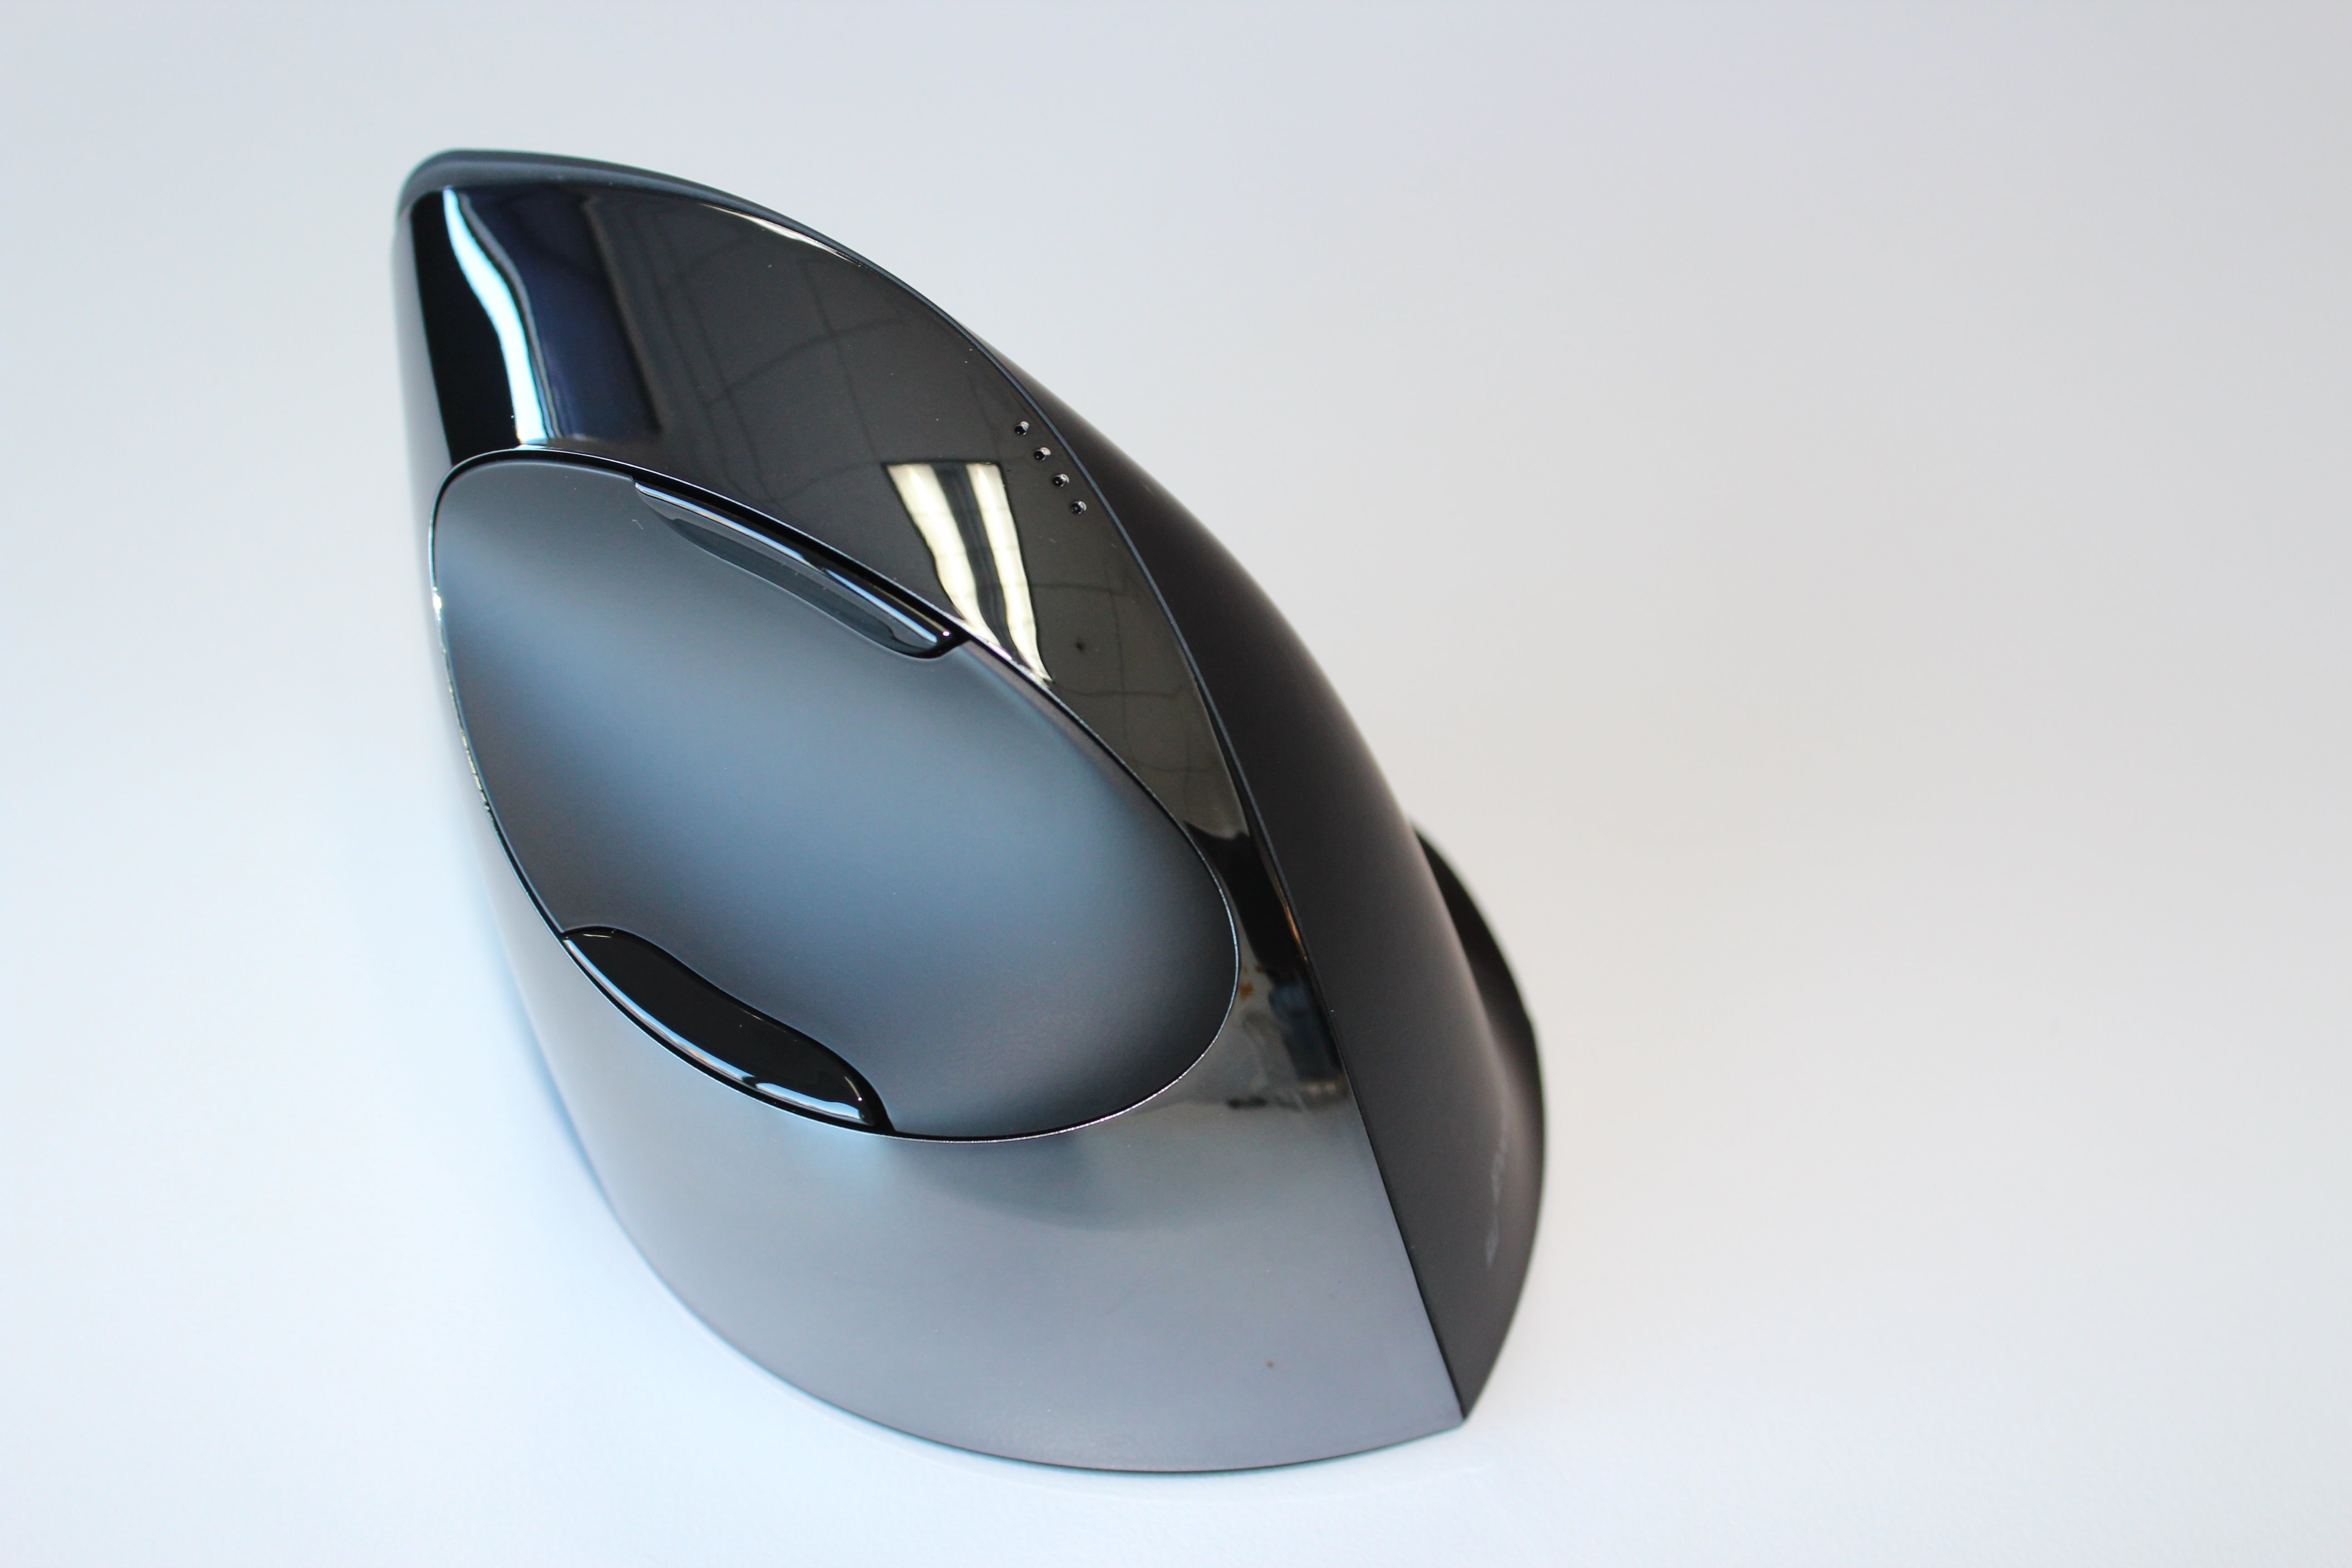 evoluent vertical mouse c review